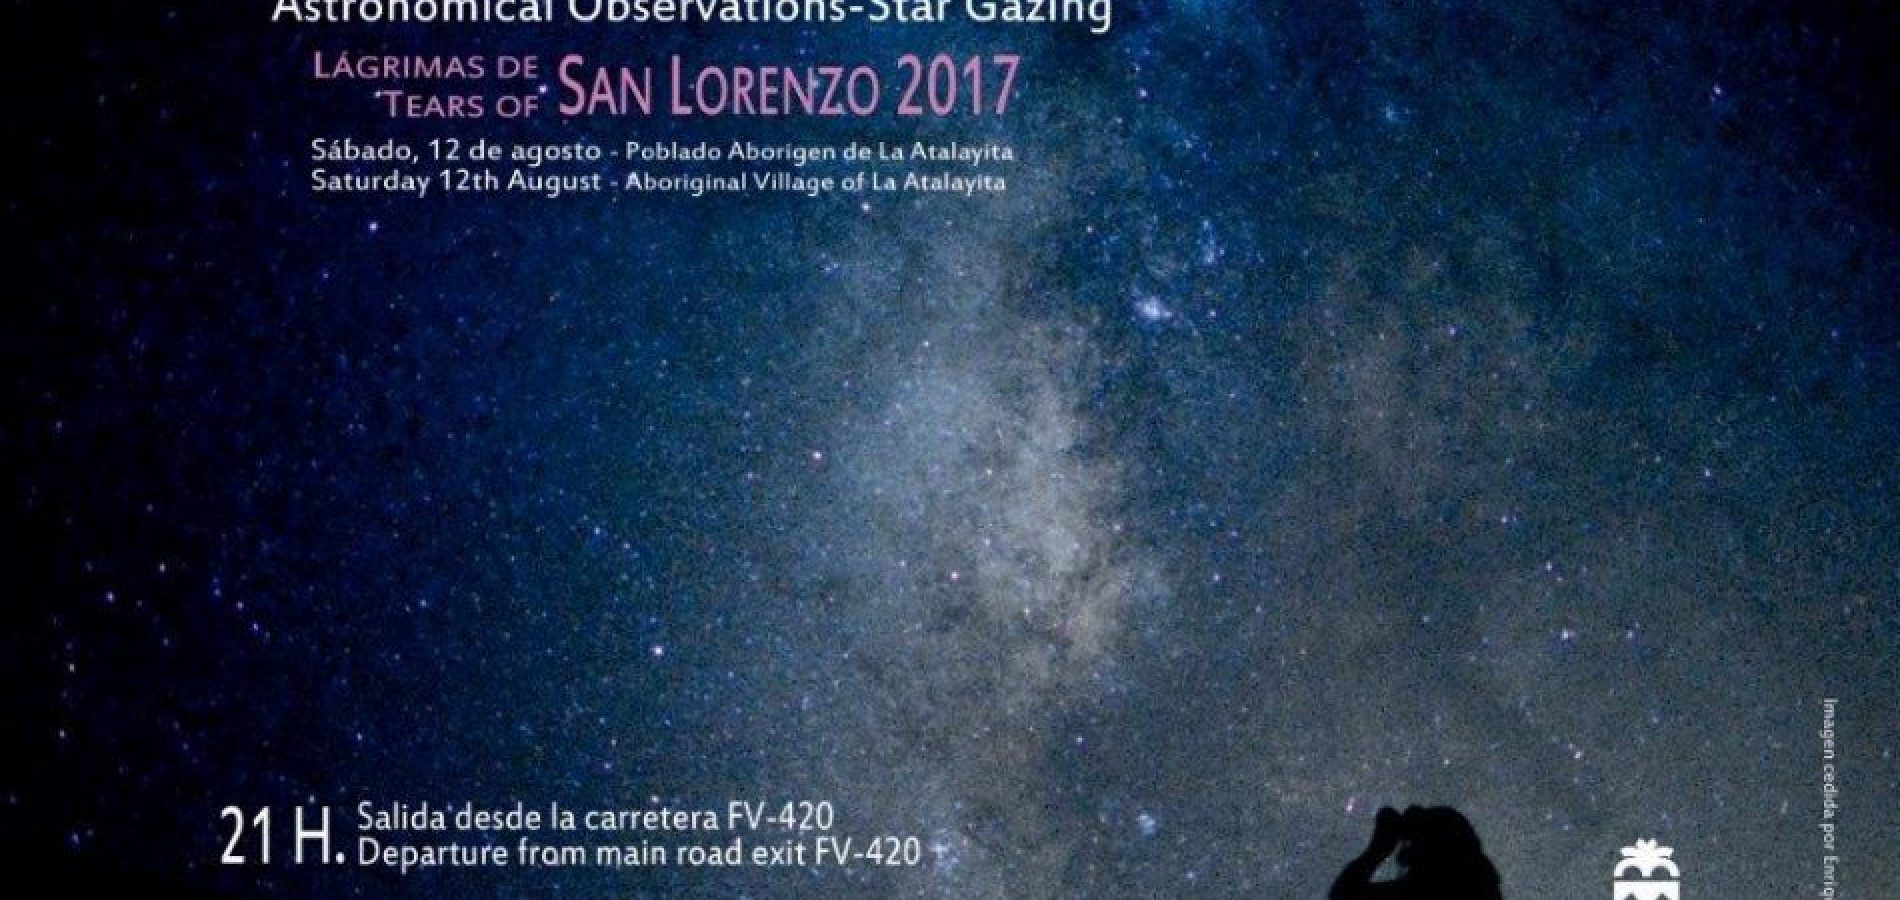 Astronomical Observations-Star Gazing “Tears of San Lorenzo”.